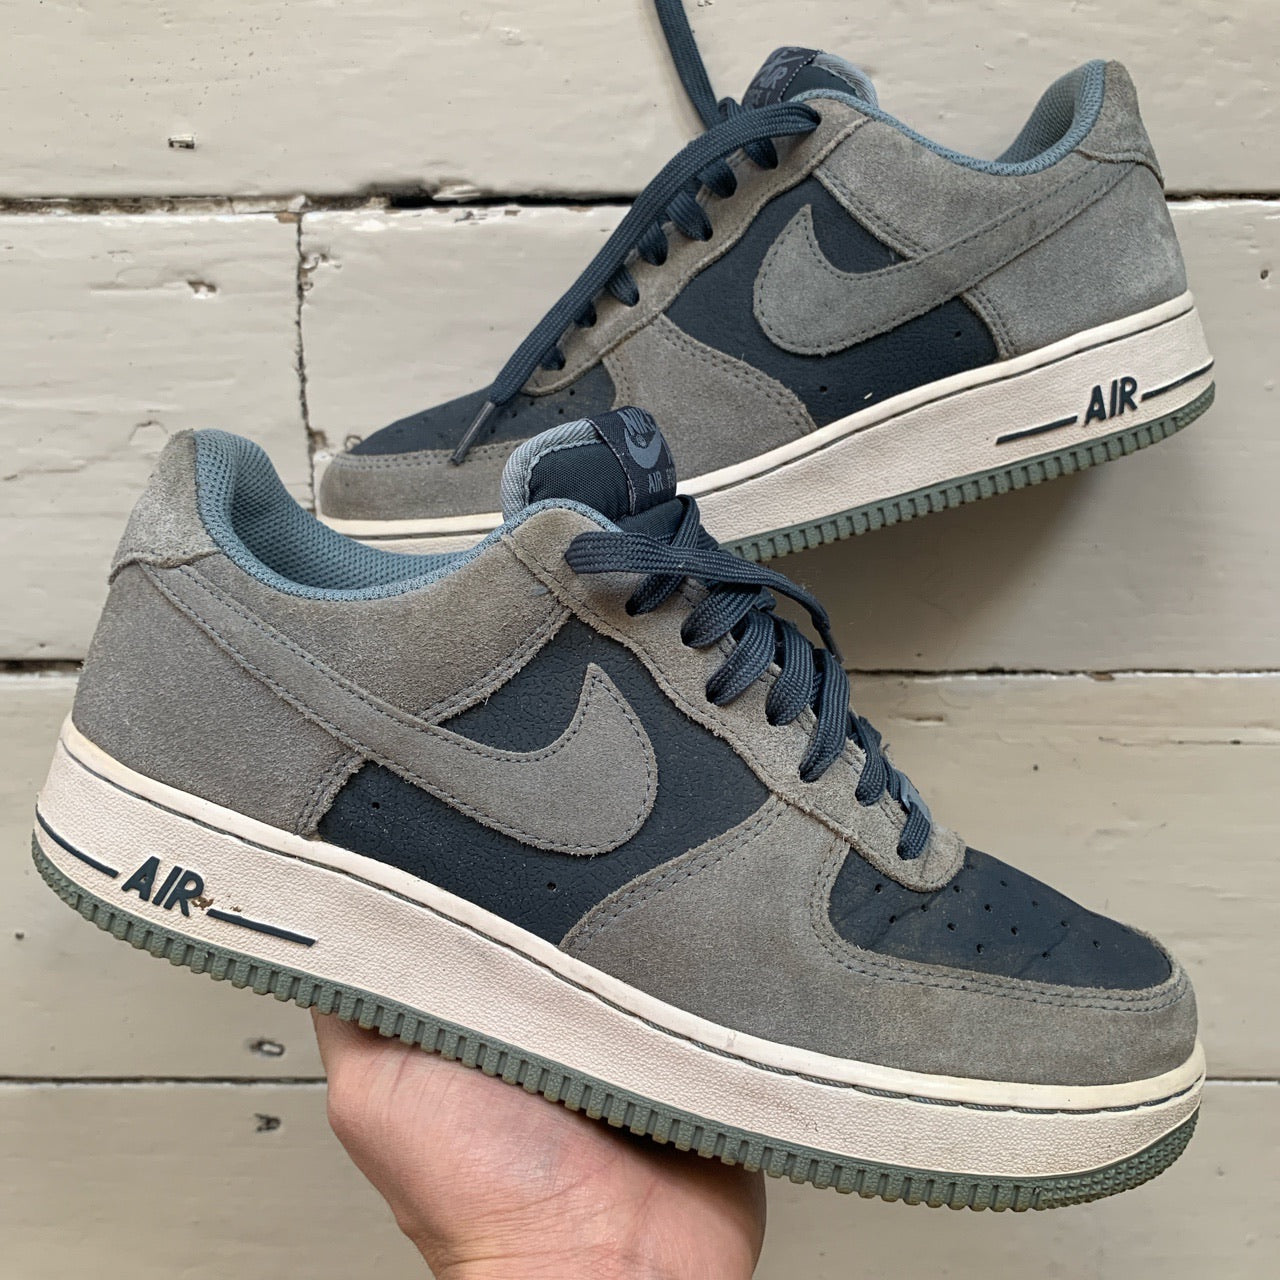 Nike Air Force 1 Suede Grey and Blue (UK 7)